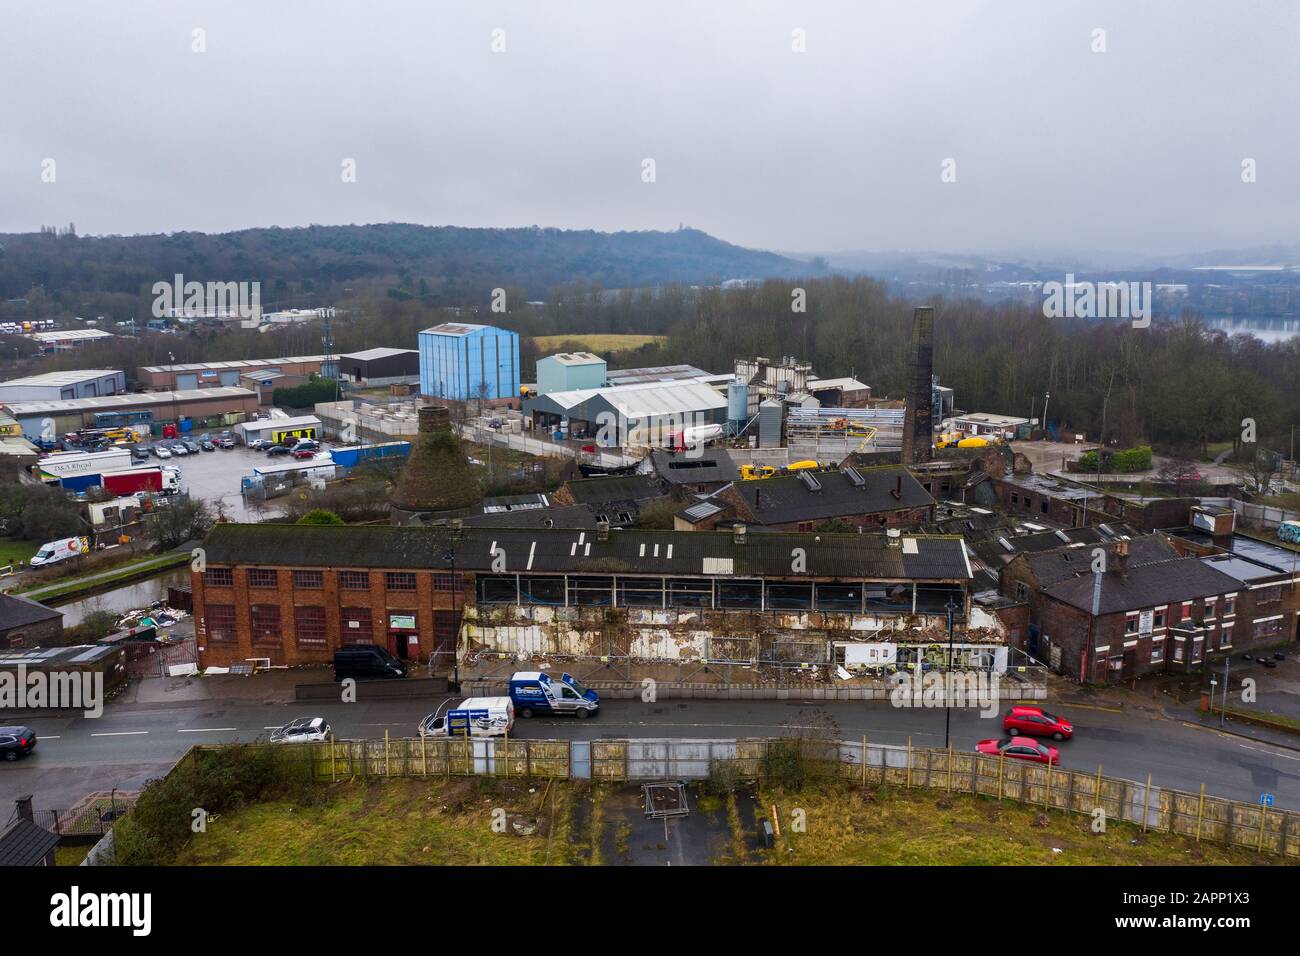 Aerial view of Kensington Pottery Works an old abandoned, derelict pottery factory and bottle kiln located in Longport,  Industrial decline Stock Photo